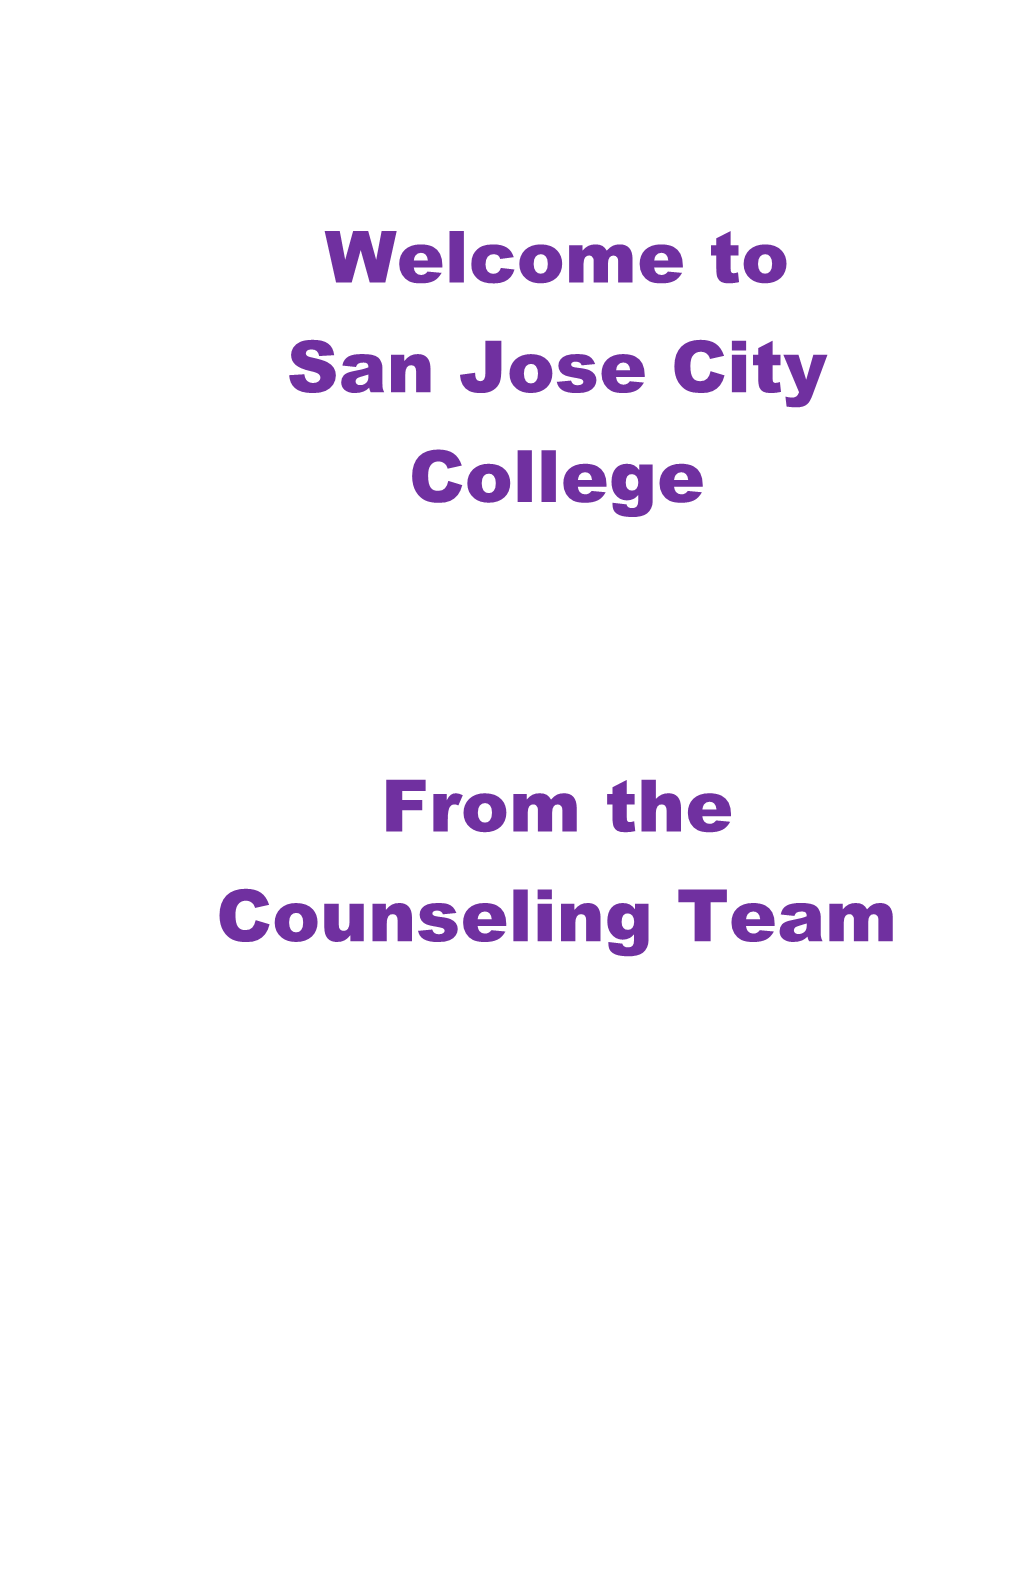 Welcome to San Jose City College from the Counseling Team